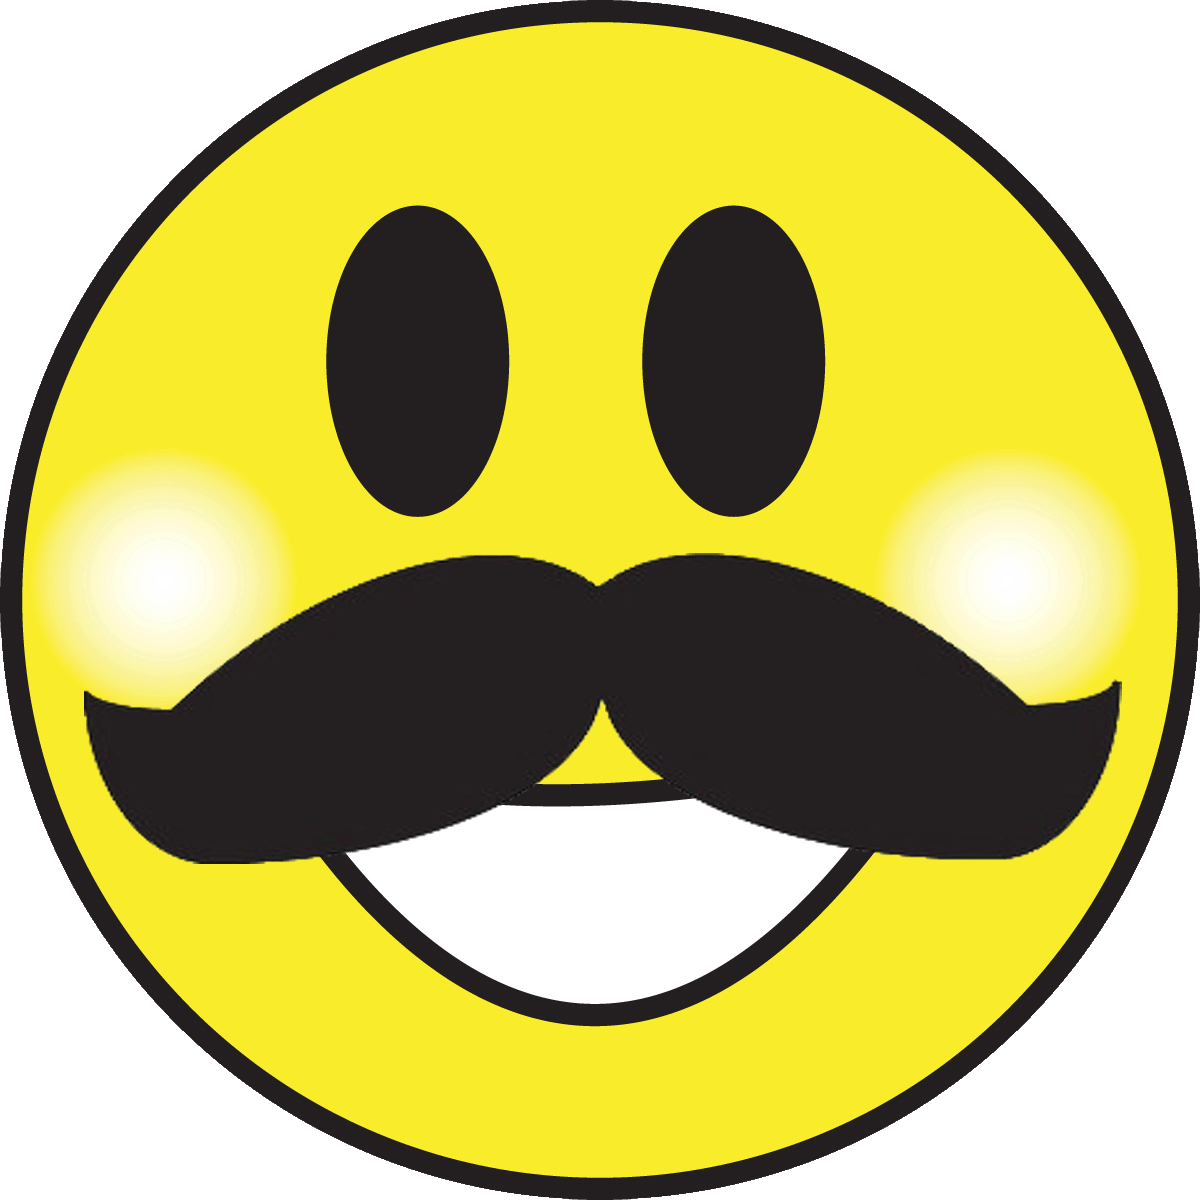 smiley face images click to see a range of mo badges or design medium